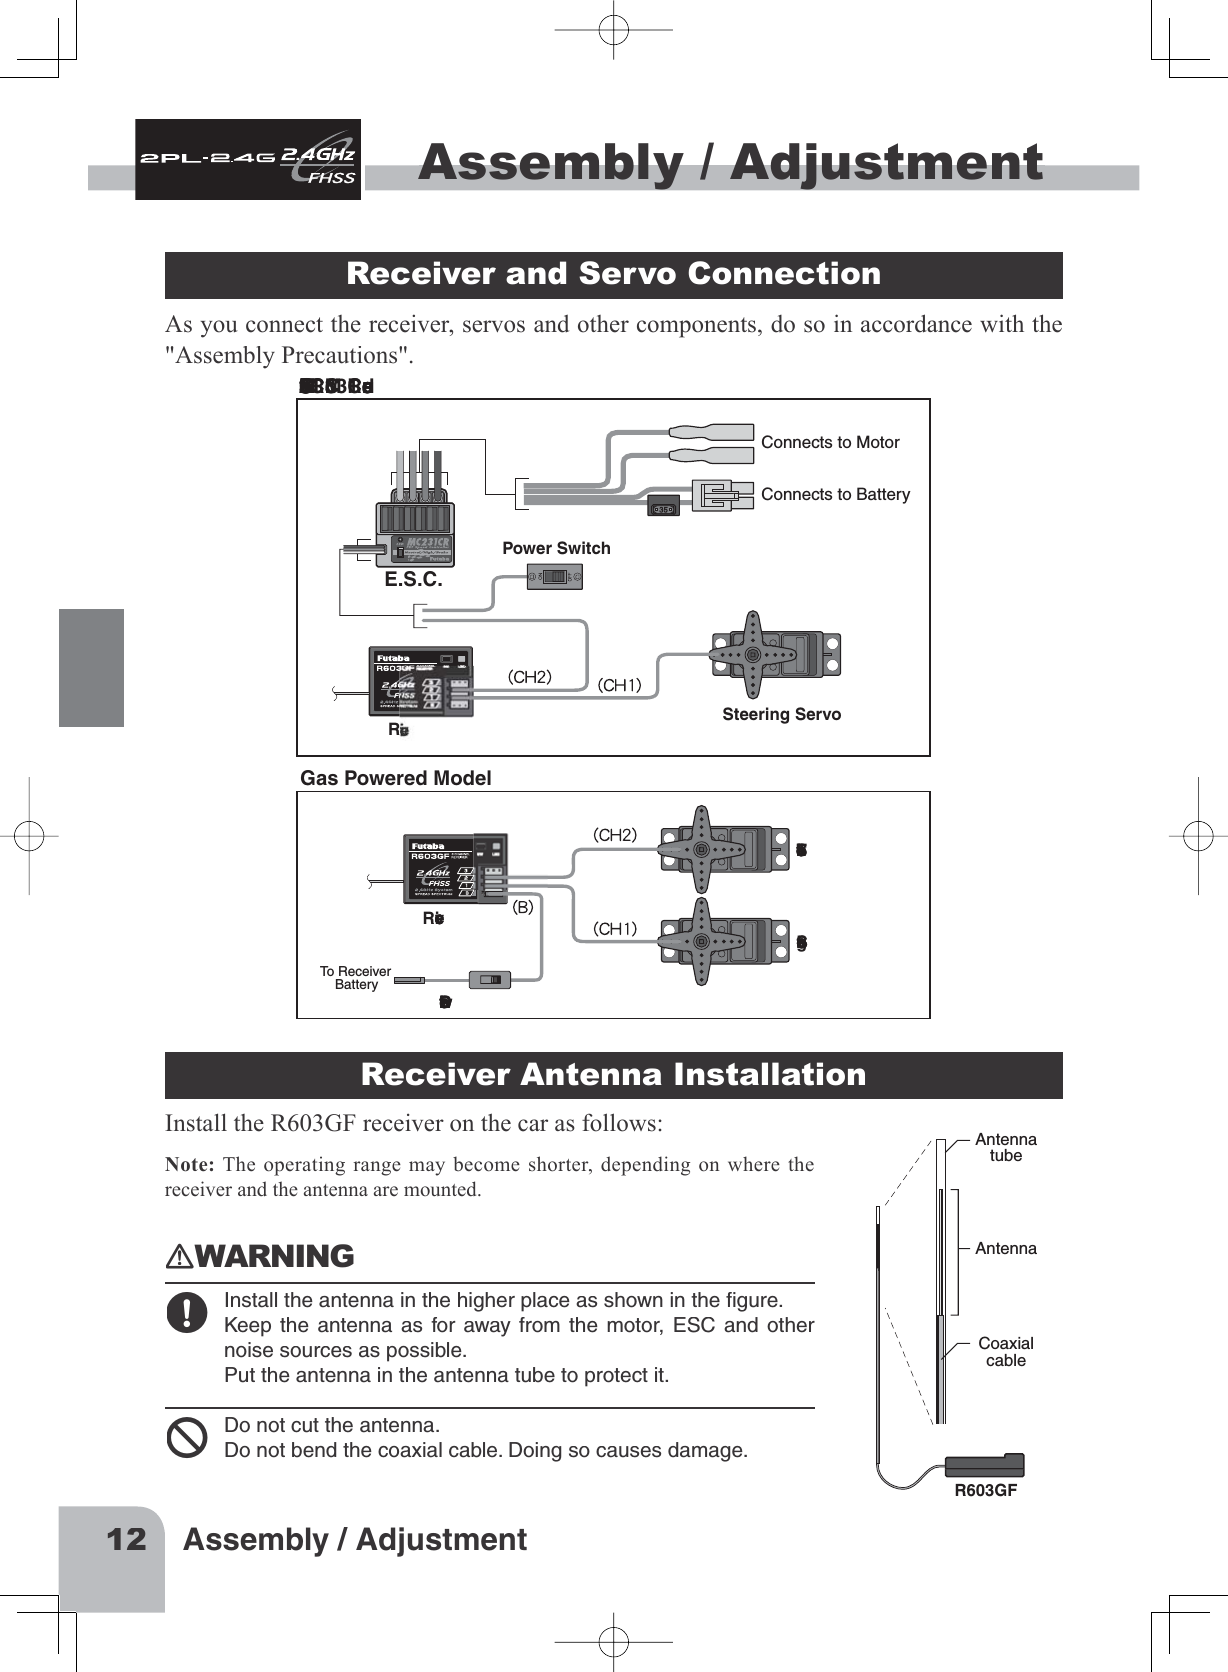 12Assembly / AdjustmentAssembly / AdjustmentAssembly / Adjustment Receiver and Servo Connection As you connect the receiver, servos and other components, do so in accordance with the &quot;Assembly Precautions&quot;.Connections when a E.S.C. MC231CR or MC331CR are used.Steering ServoThrottle ServoReceiverReceiverPower SwitchTo Receiver    BatterySteering ServoE.S.C.Power SwitchConnects to MotorConnects to BatteryGas Powered ModelReceiver Antenna InstallationInstall the R603GF receiver on the car as follows:Note: The operating range may become shorter, depending on where the receiver and the antenna are mounted.󾙏WARNING󾙋Installtheantennainthehigherplaceasshownintheﬁgure.Keeptheantennaasforawayfromthemotor,ESCandothernoisesourcesaspossible.Puttheantennaintheantennatubetoprotectit.󾙍Donotcuttheantenna.Donotbendthecoaxialcable.Doingsocausesdamage.AntennatubeAntennaCoaxialcableR603GF